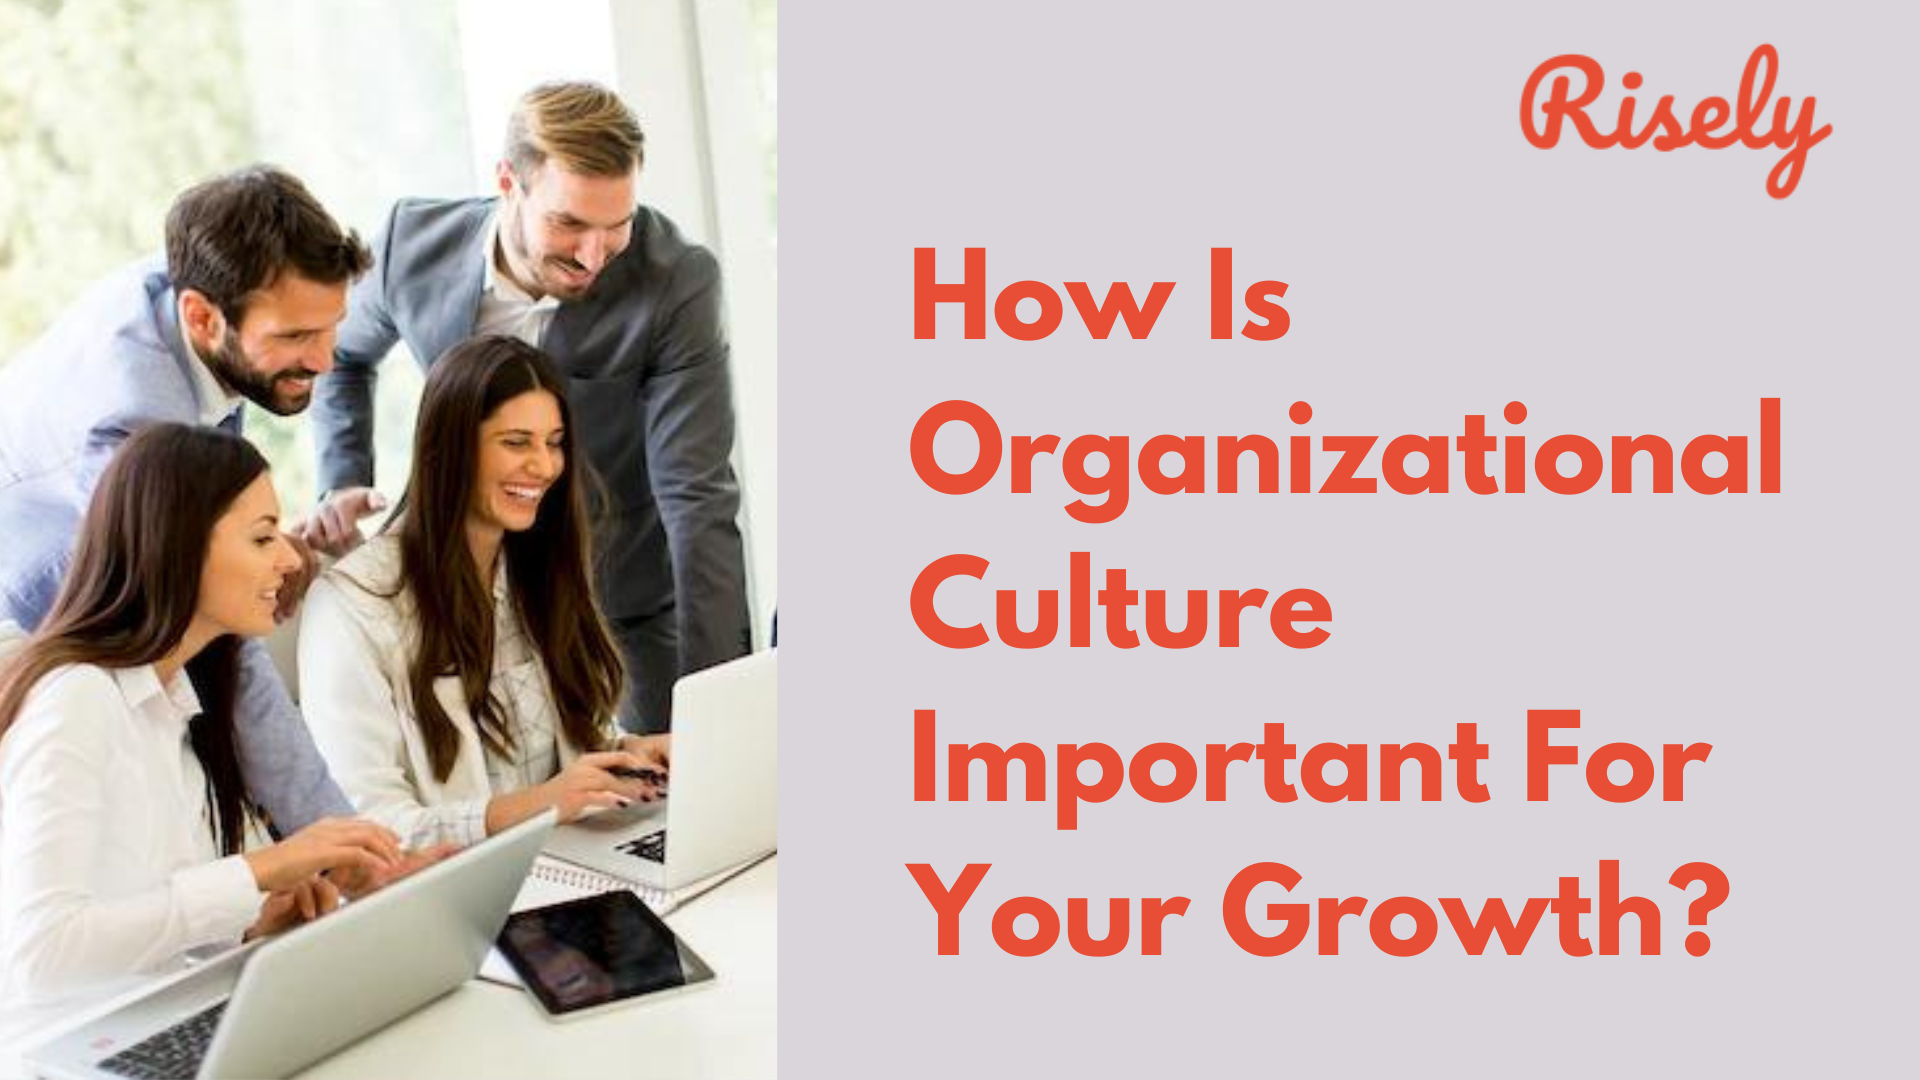 How Is Organizational Culture Important For Your Growth?